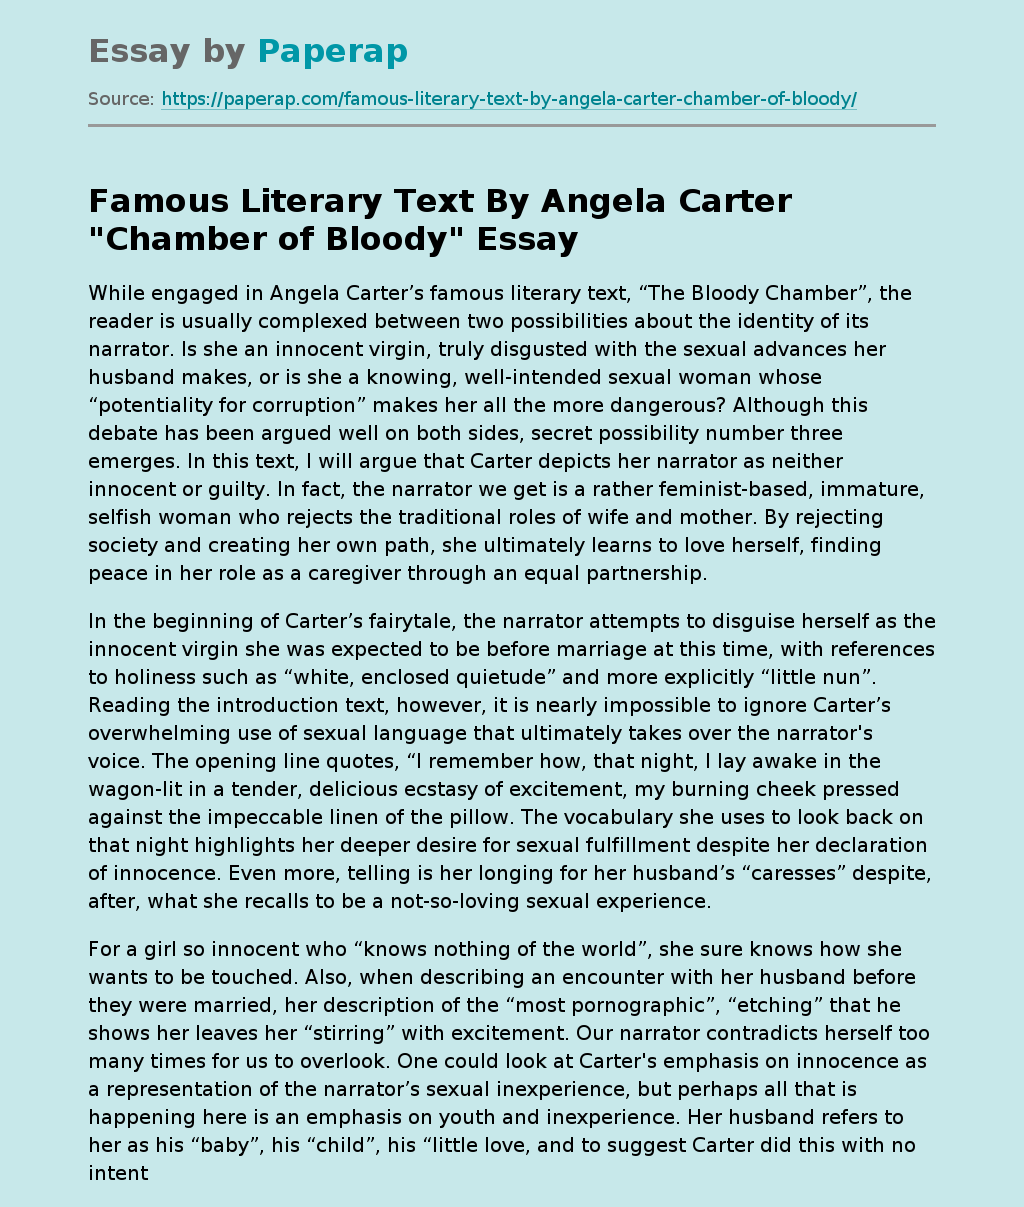 Famous Literary Text By Angela Carter "Chamber of Bloody"